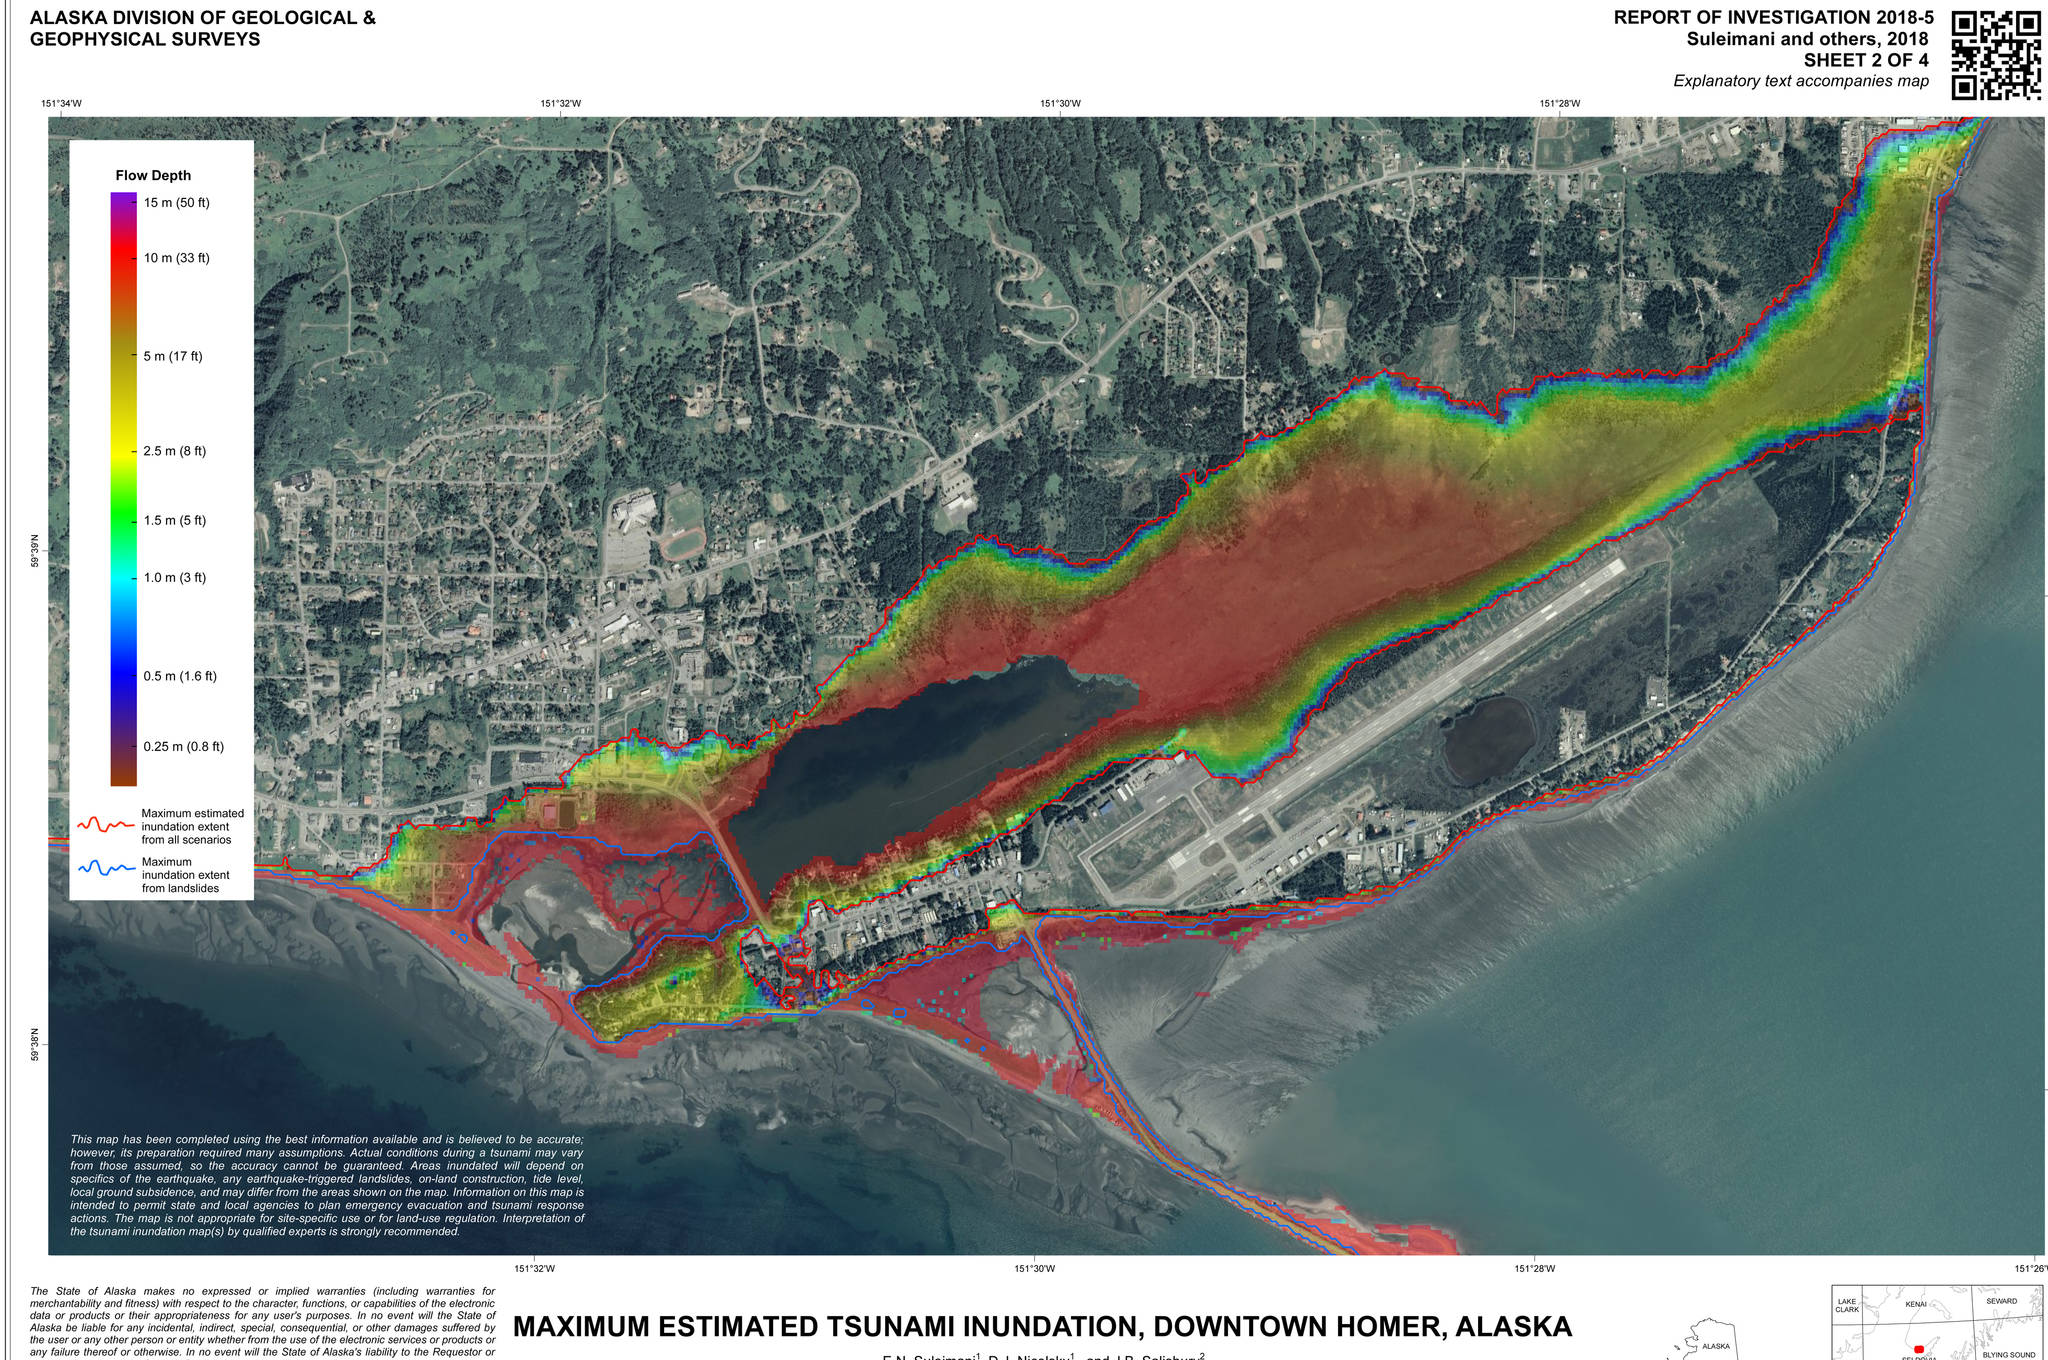 An updated tsunami zone map shows the areas of inundation in the downtown Homer area. The maxiumum inundation zone extends up to 50 feet above sea level. (Map by the Alaska Division of Geological and Geophysical Surveys)